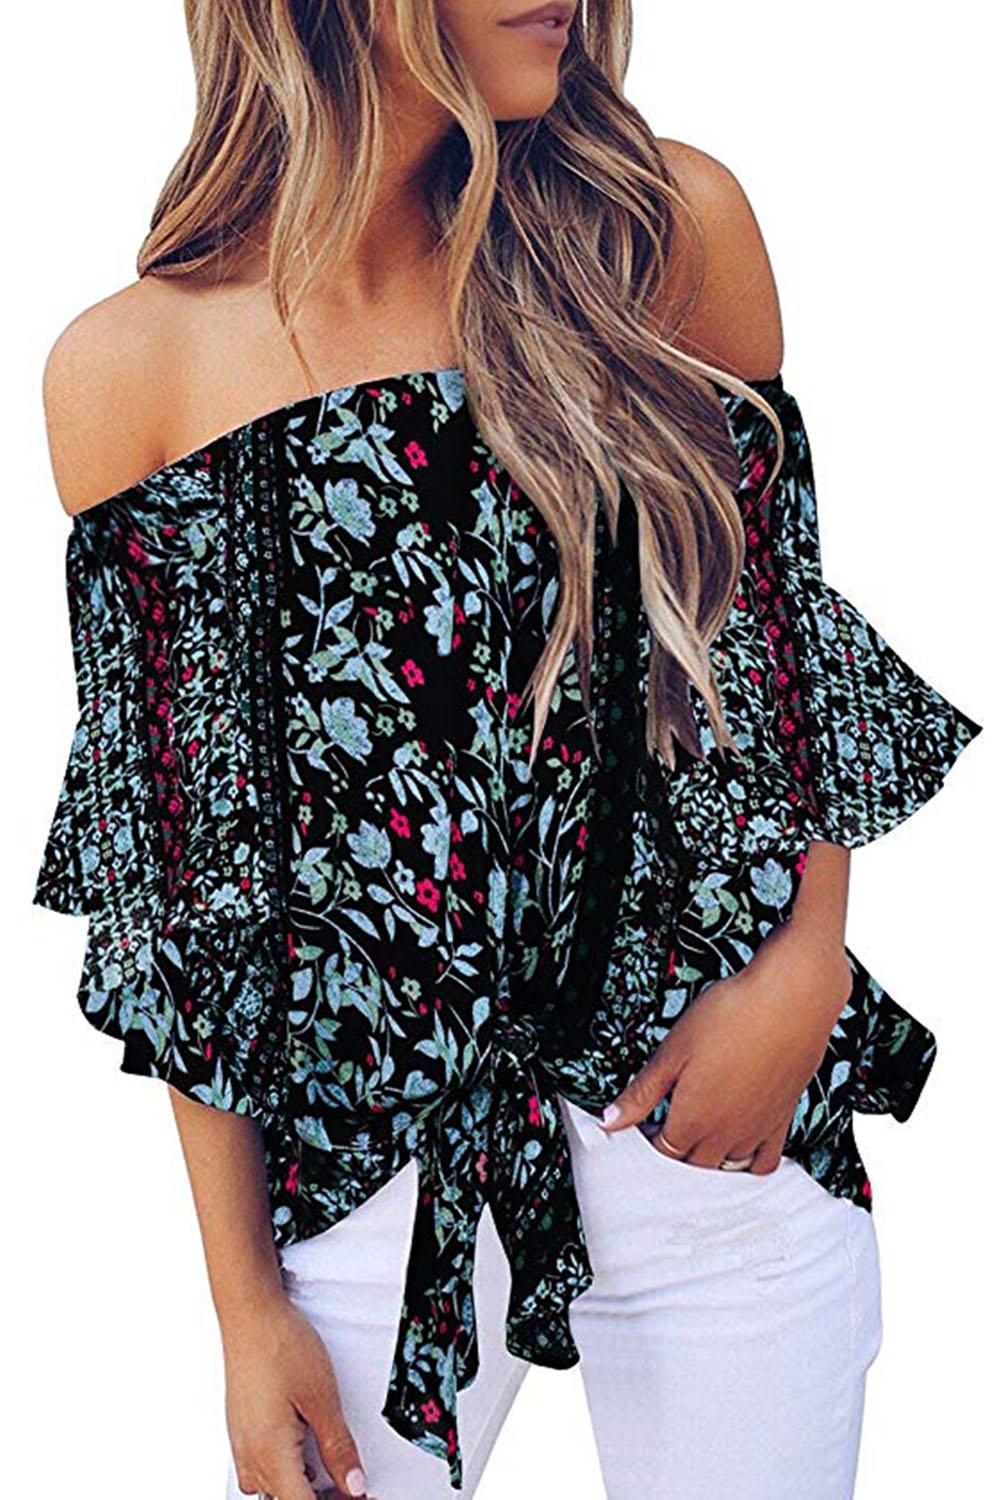 $ 19.99 - Asvivid Womens Floral Off the Shoulder Tops 3 4 Flare Sleeve ...